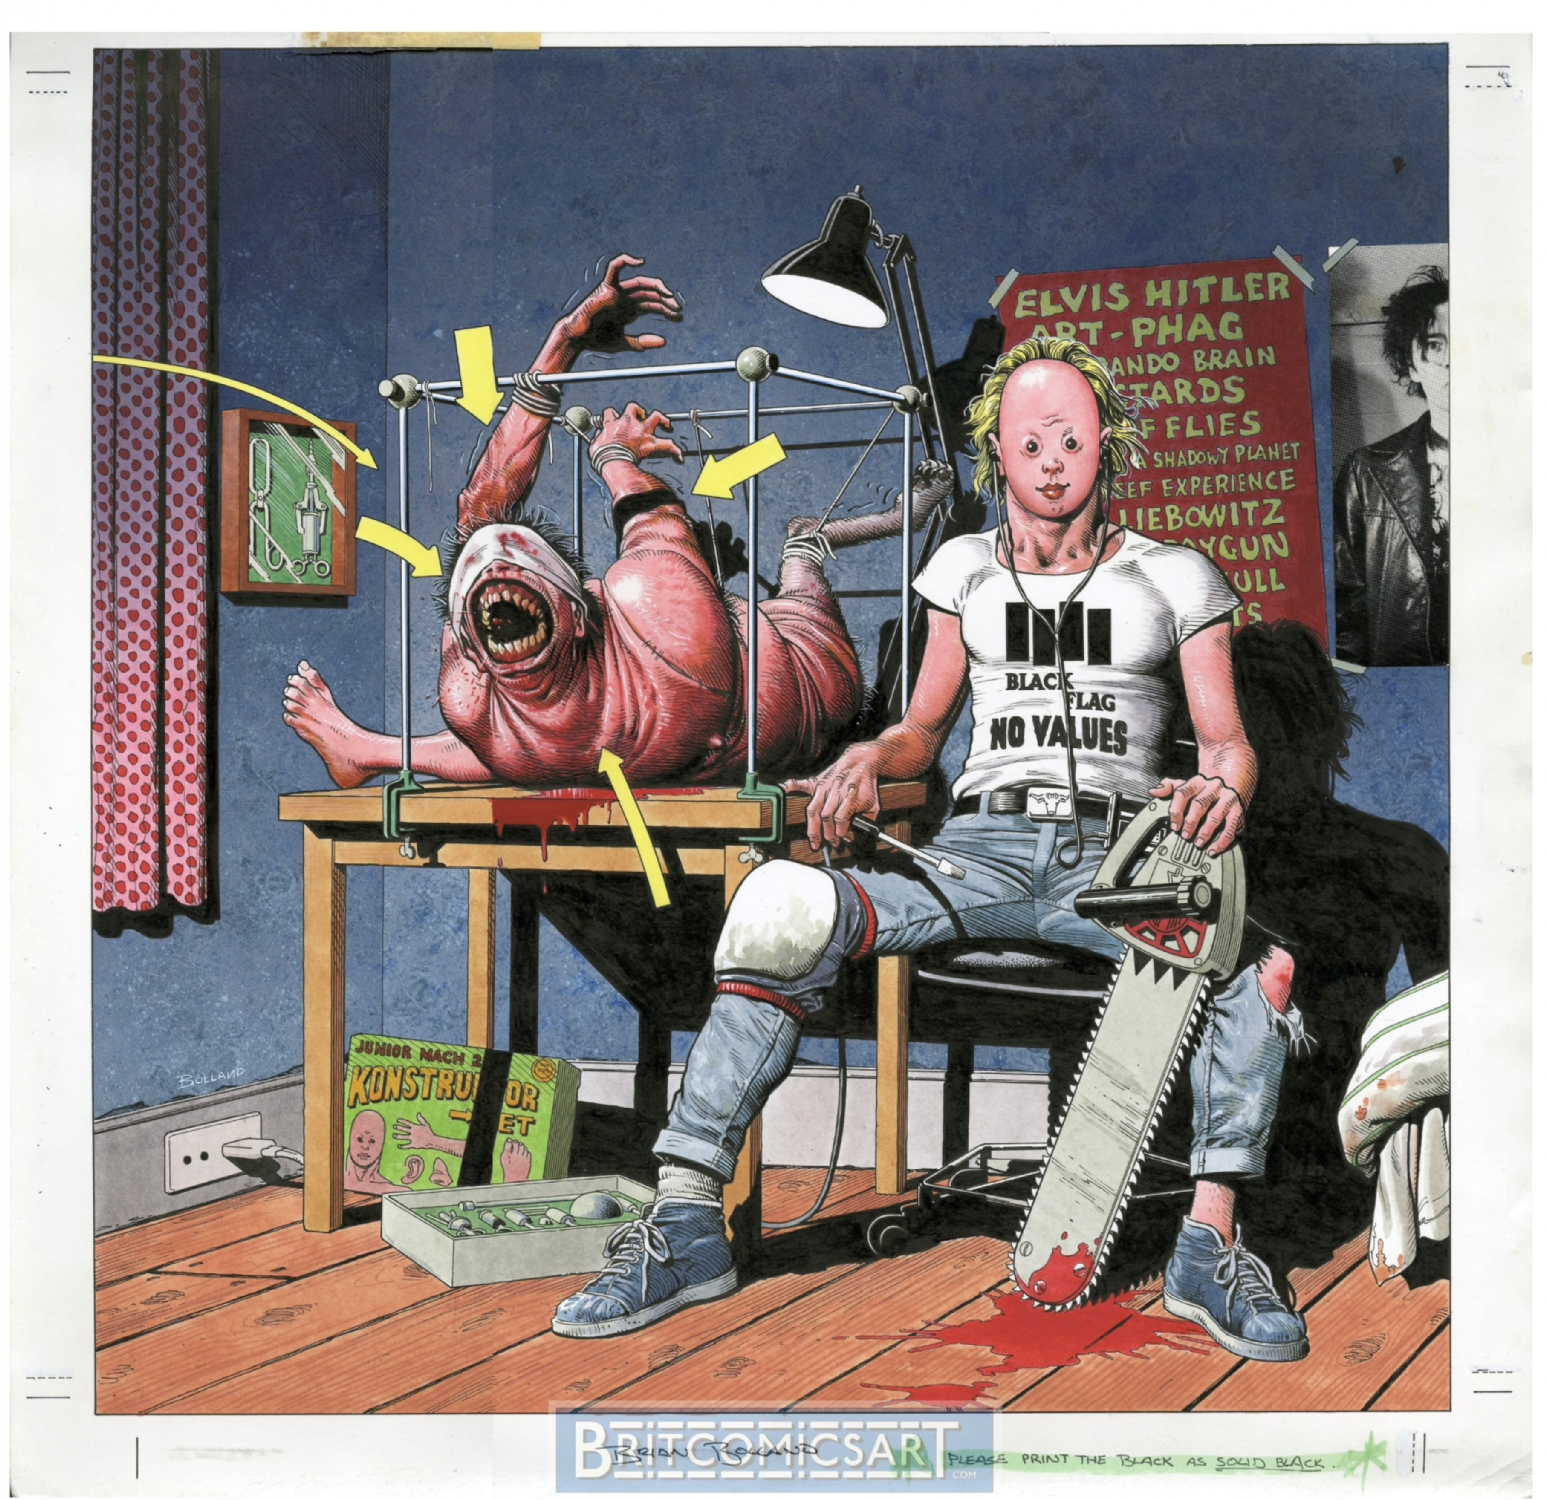 Beautiful Happiness album cover by Brian Bolland by Brian Bolland